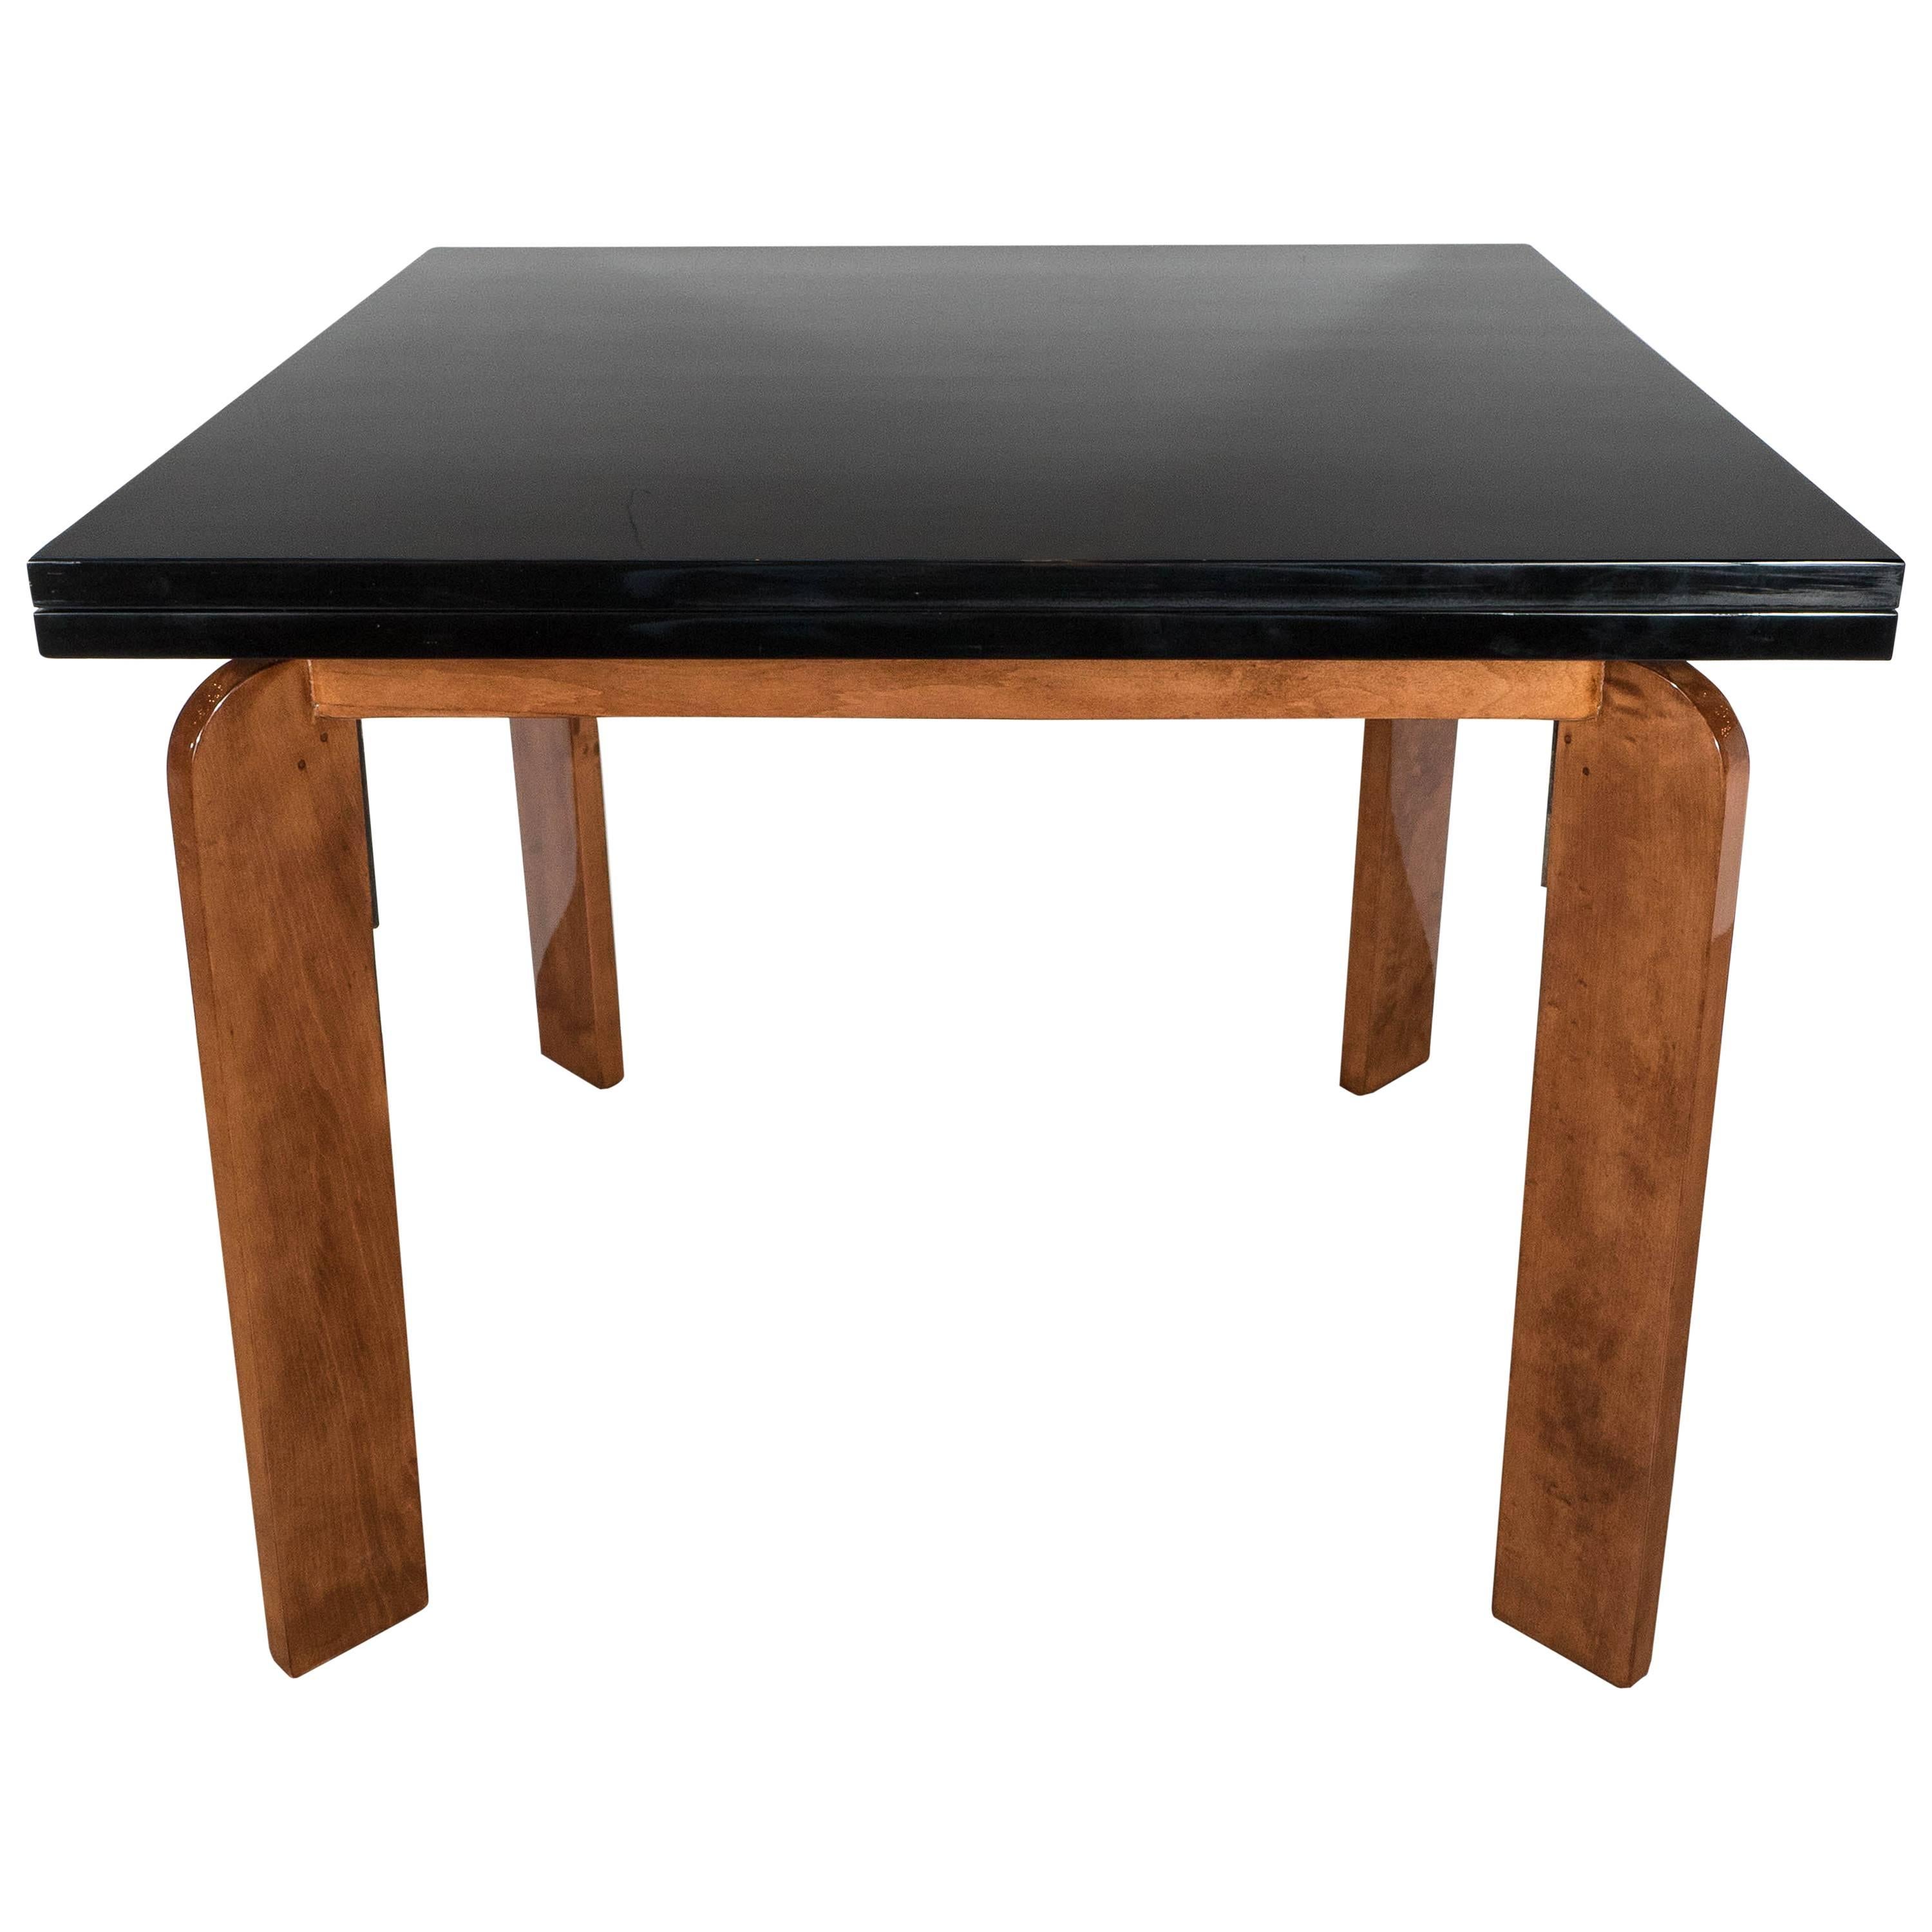  Streamline Art Deco Flip-Top Extension Dining Table or Game Table by Modernage